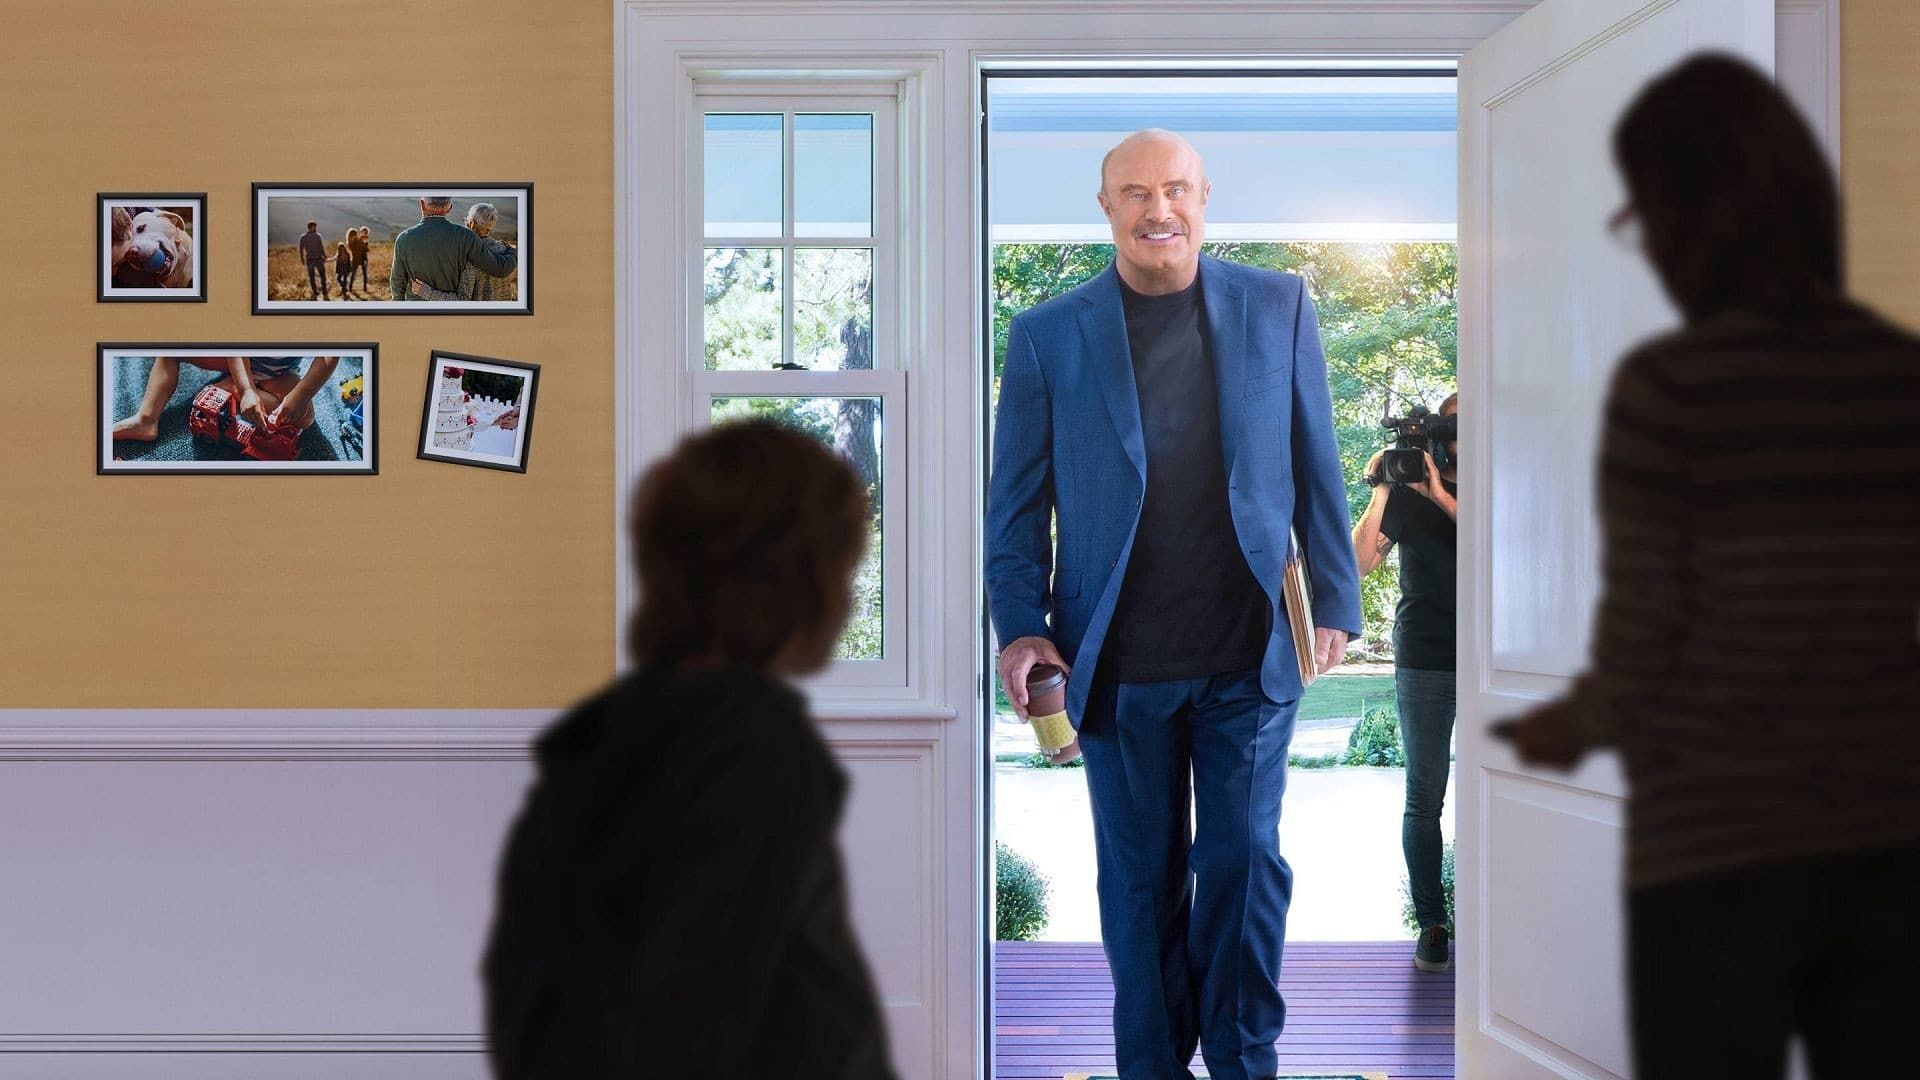 House Calls with Dr. Phil background